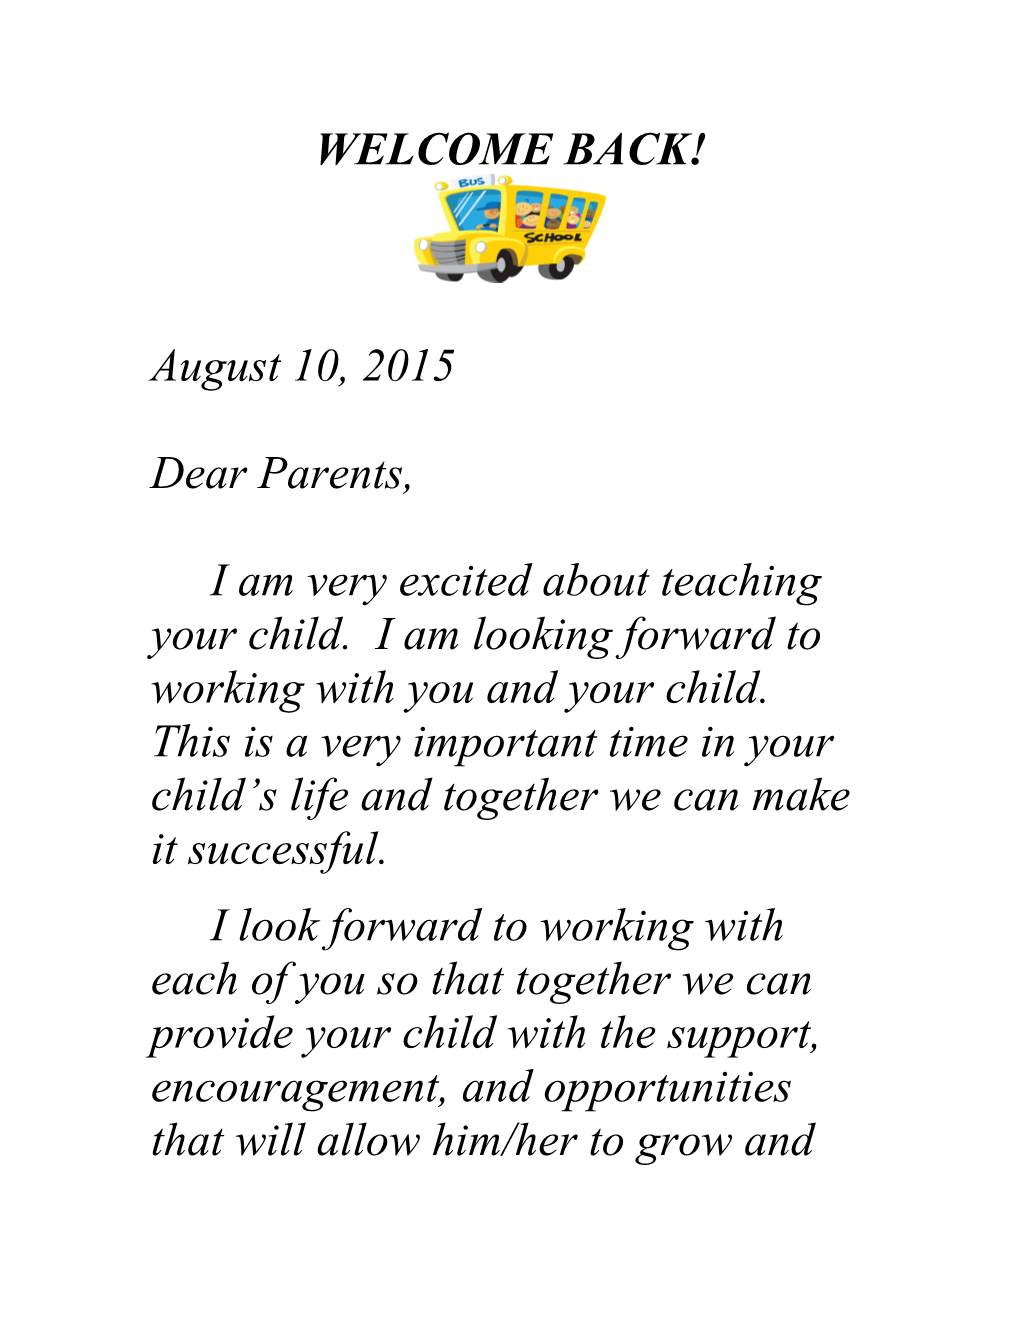 I Am Very Excited About Teaching Your Child. I Am Looking Forward to Working with You